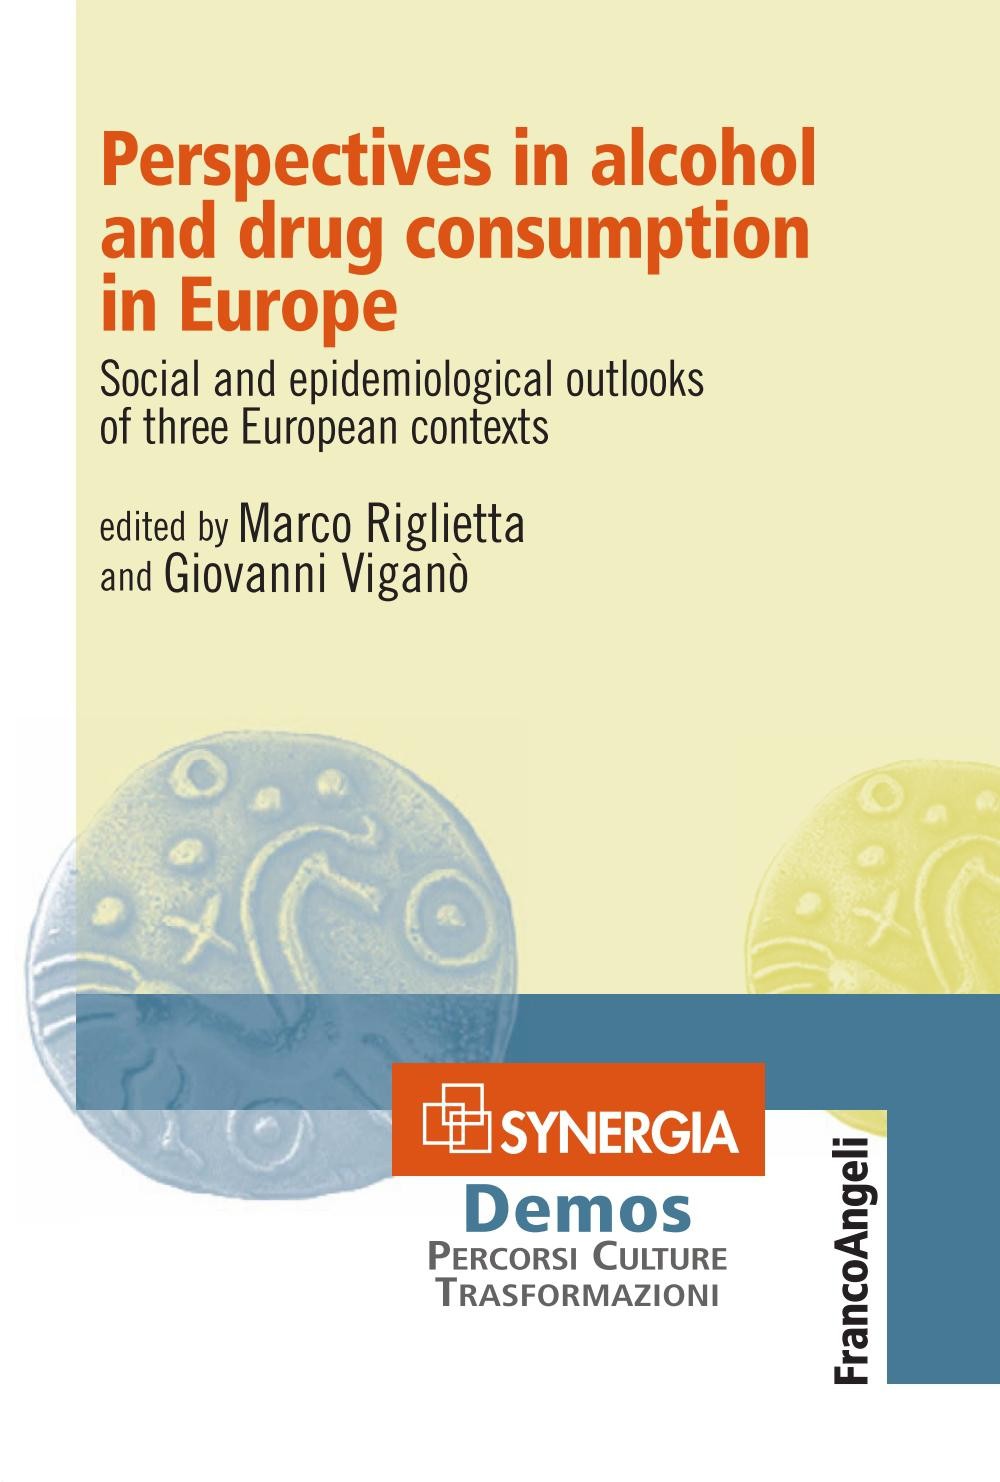 Perspectives in alcohol and drug consumption in Europe. Social and epidemiological outlooks of three European contexts - Librerie.coop